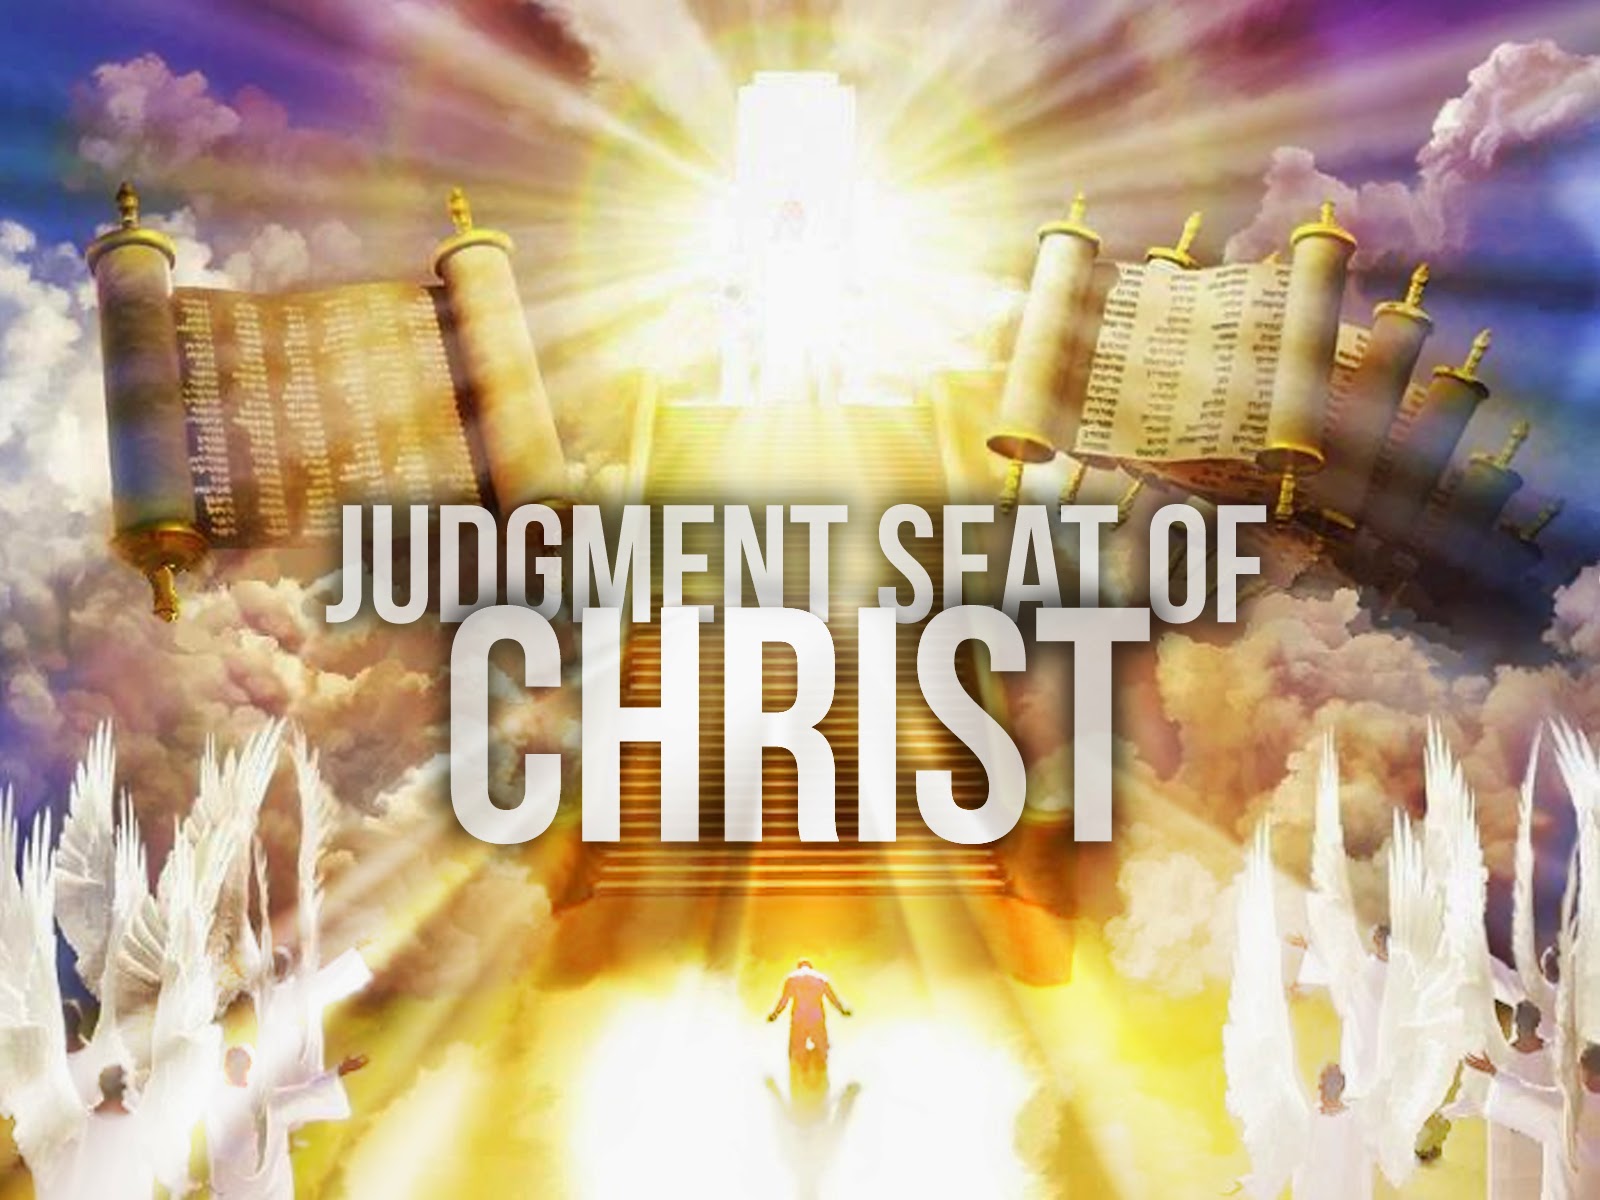 for we all judgment seat of christ